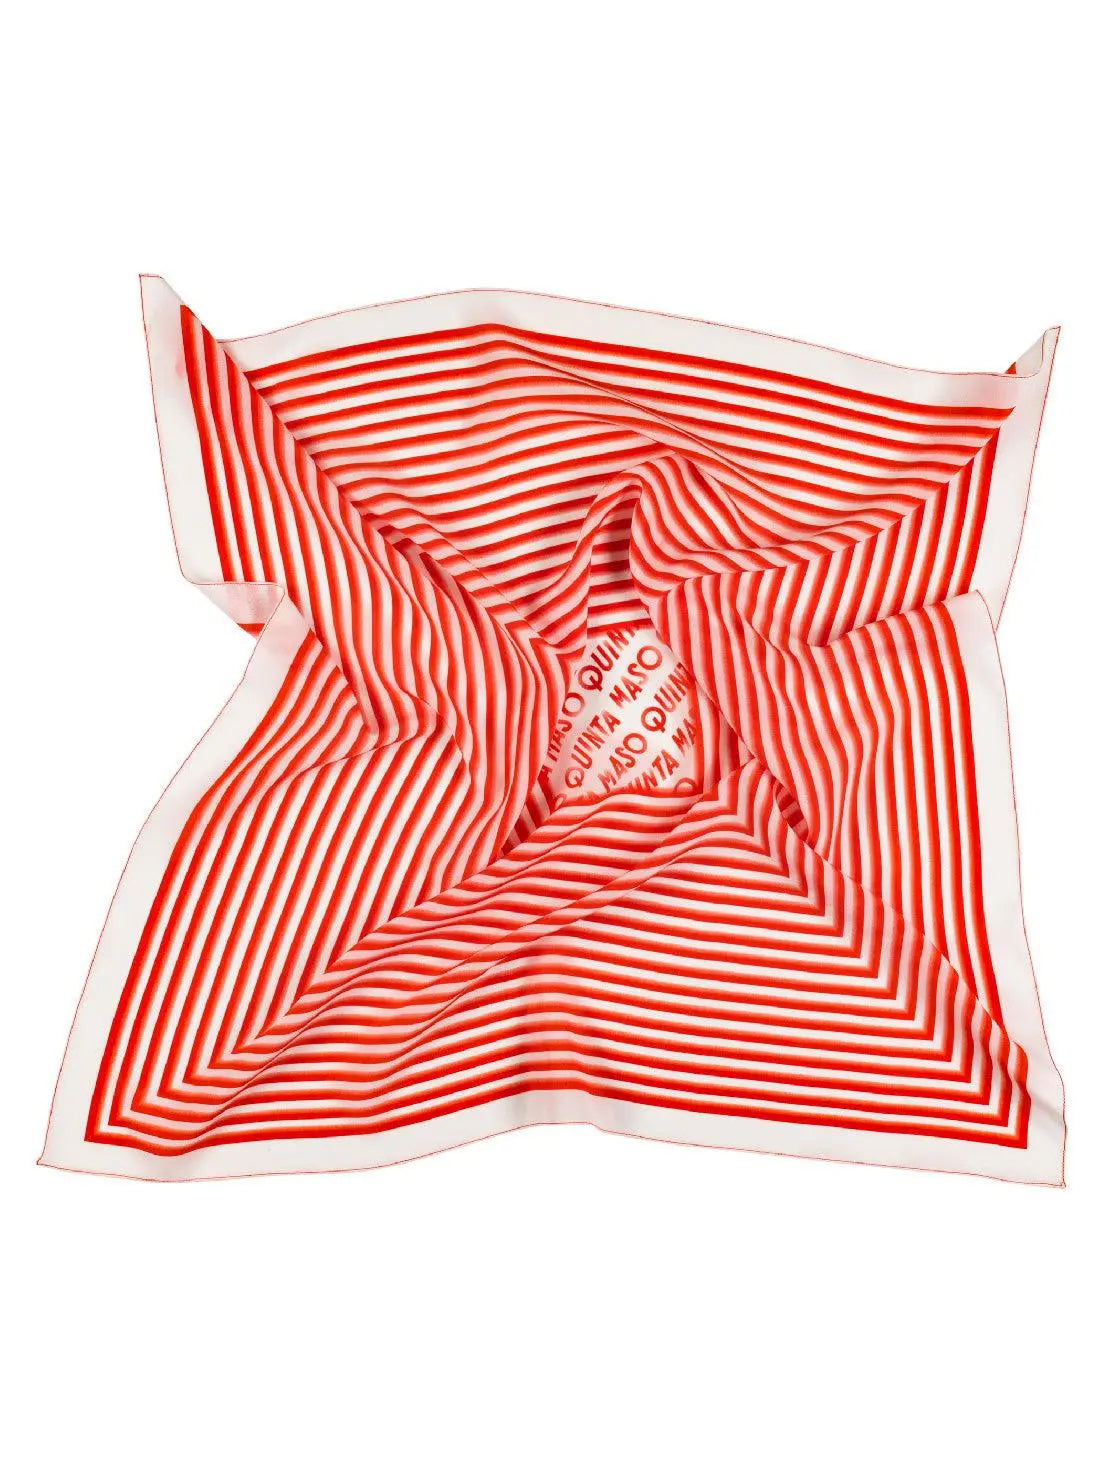 A square silk scarf featuring a vibrant red and white pattern of concentric lines forming an optical illusion of a starburst. The lines converge towards the center, where text reads "Quinta Maso." Available at Bassalstore in Barcelona, the Il Quadrato Silk Scarf has a wavy, flowing appearance, suggesting movement.